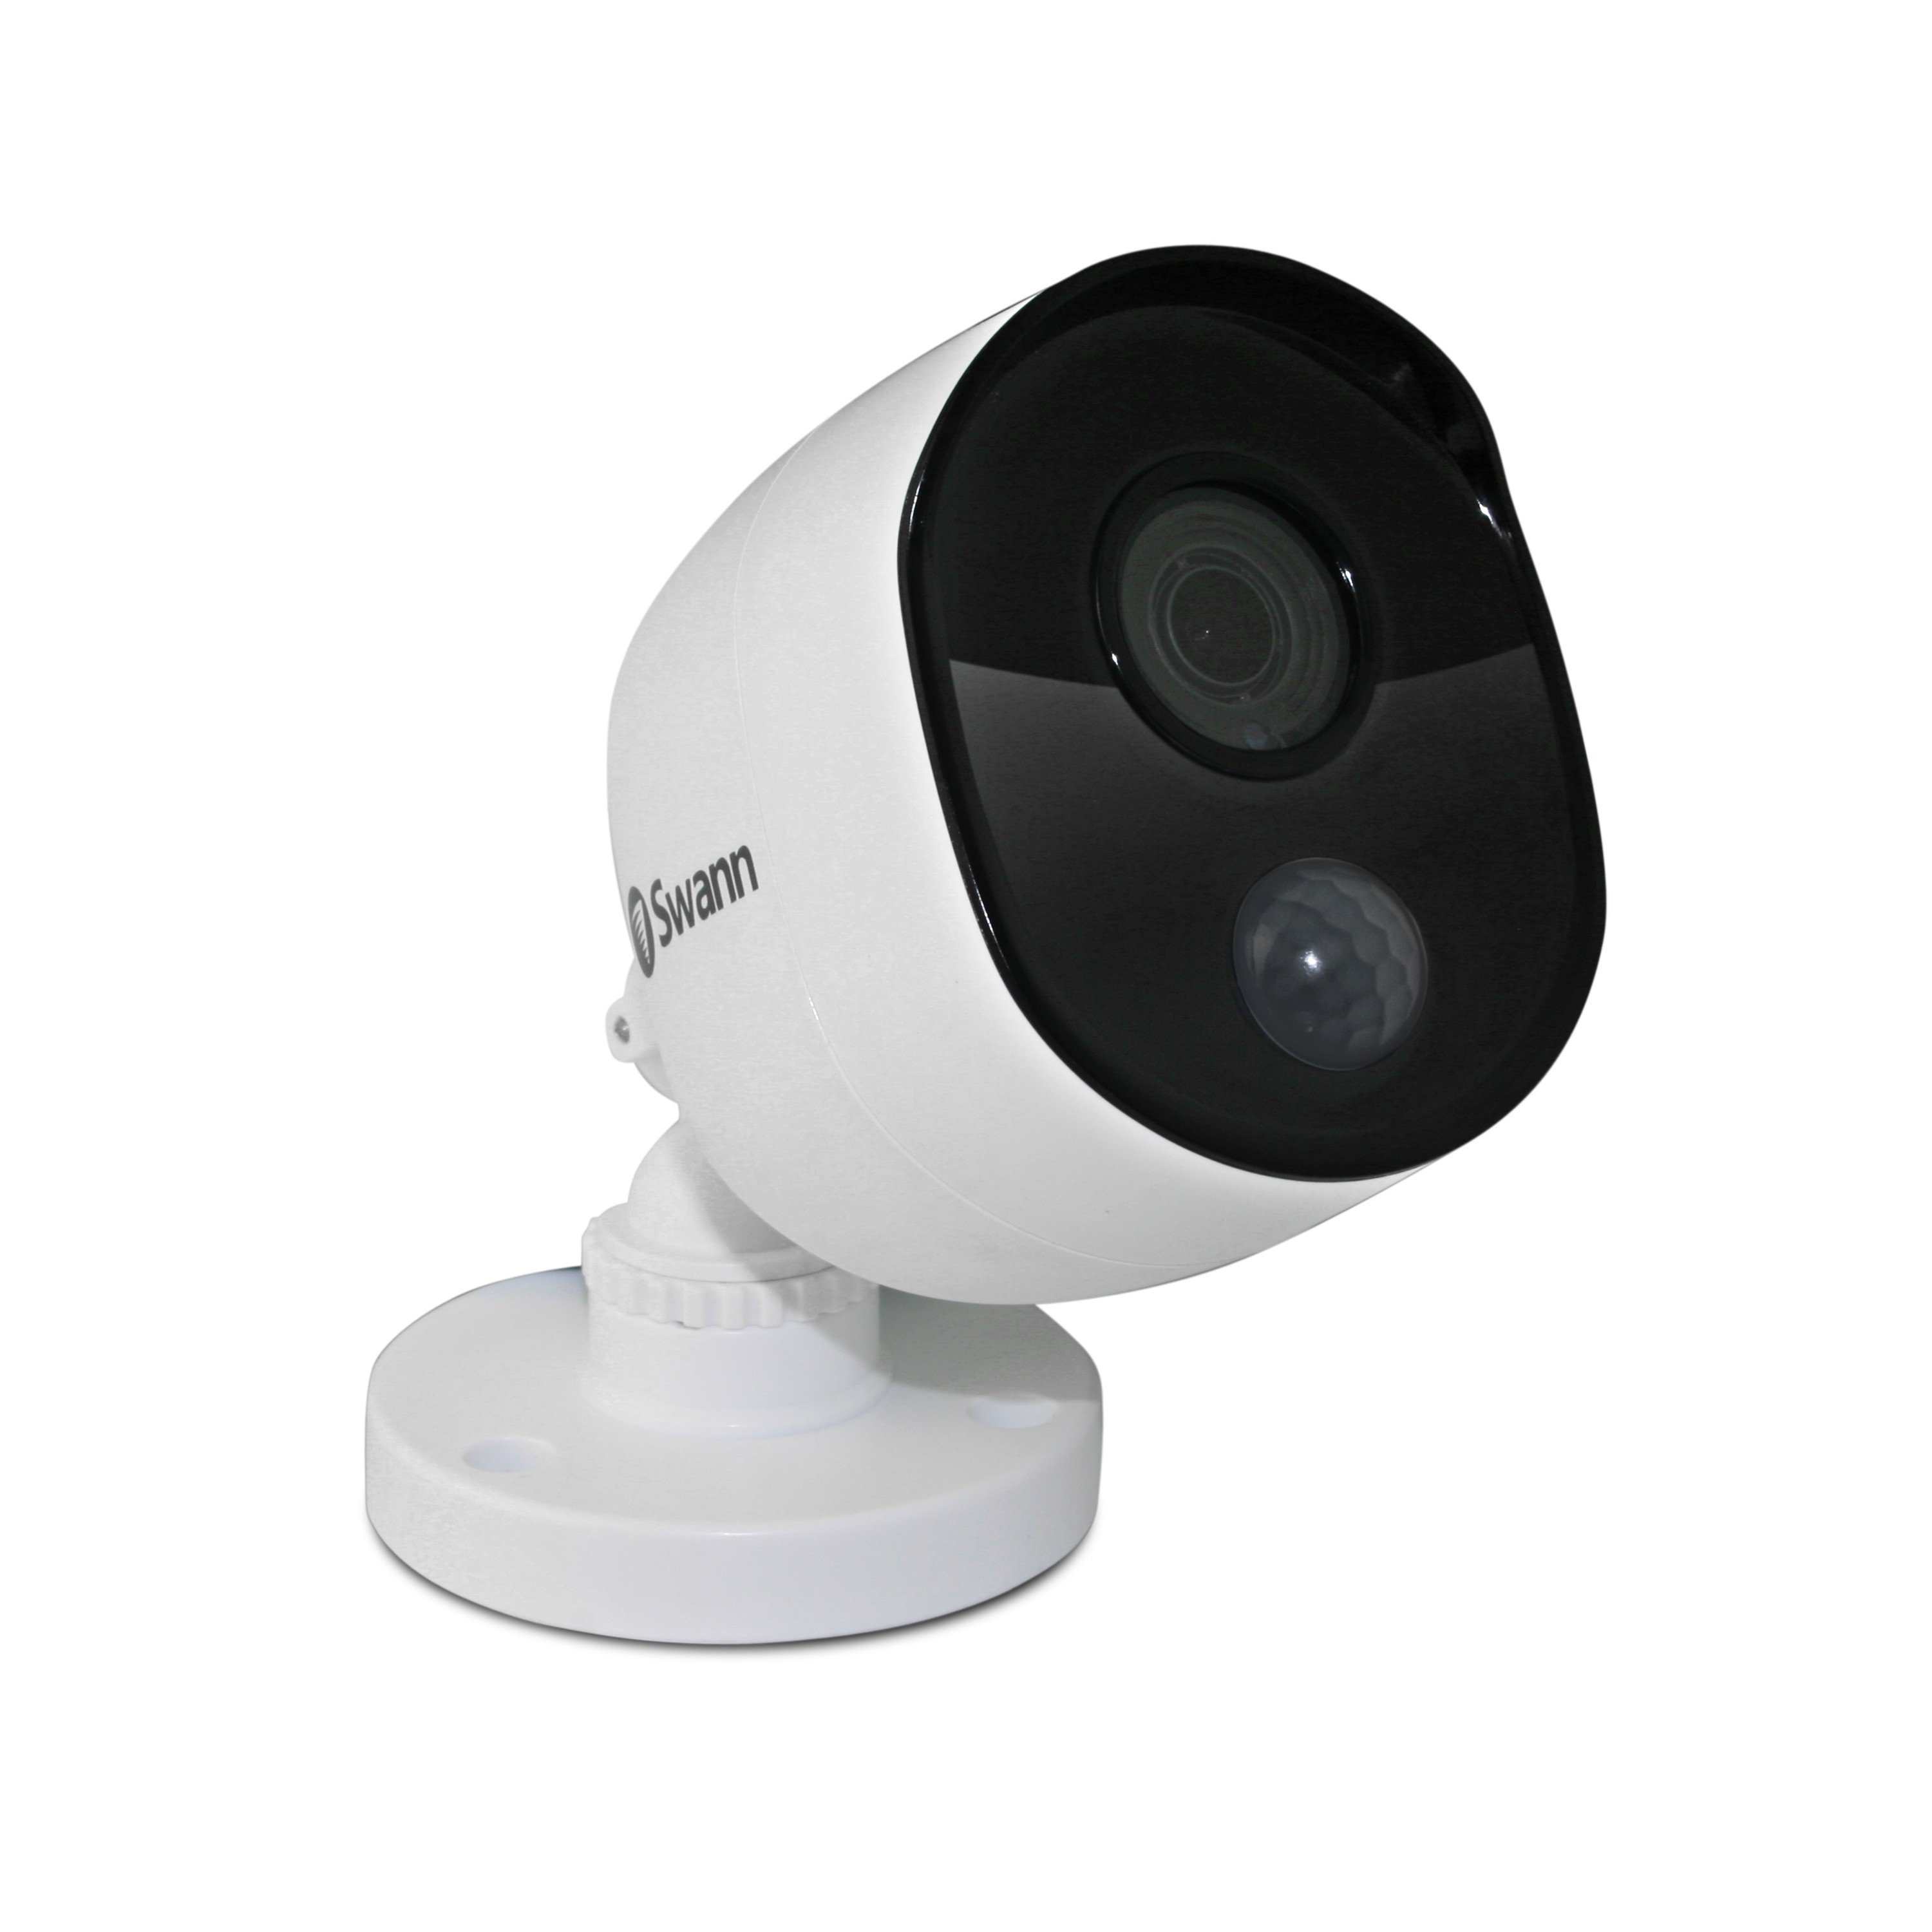 Swann Thermal Sensor Outdoor Security Camera: 1080p Full HD with IR ...